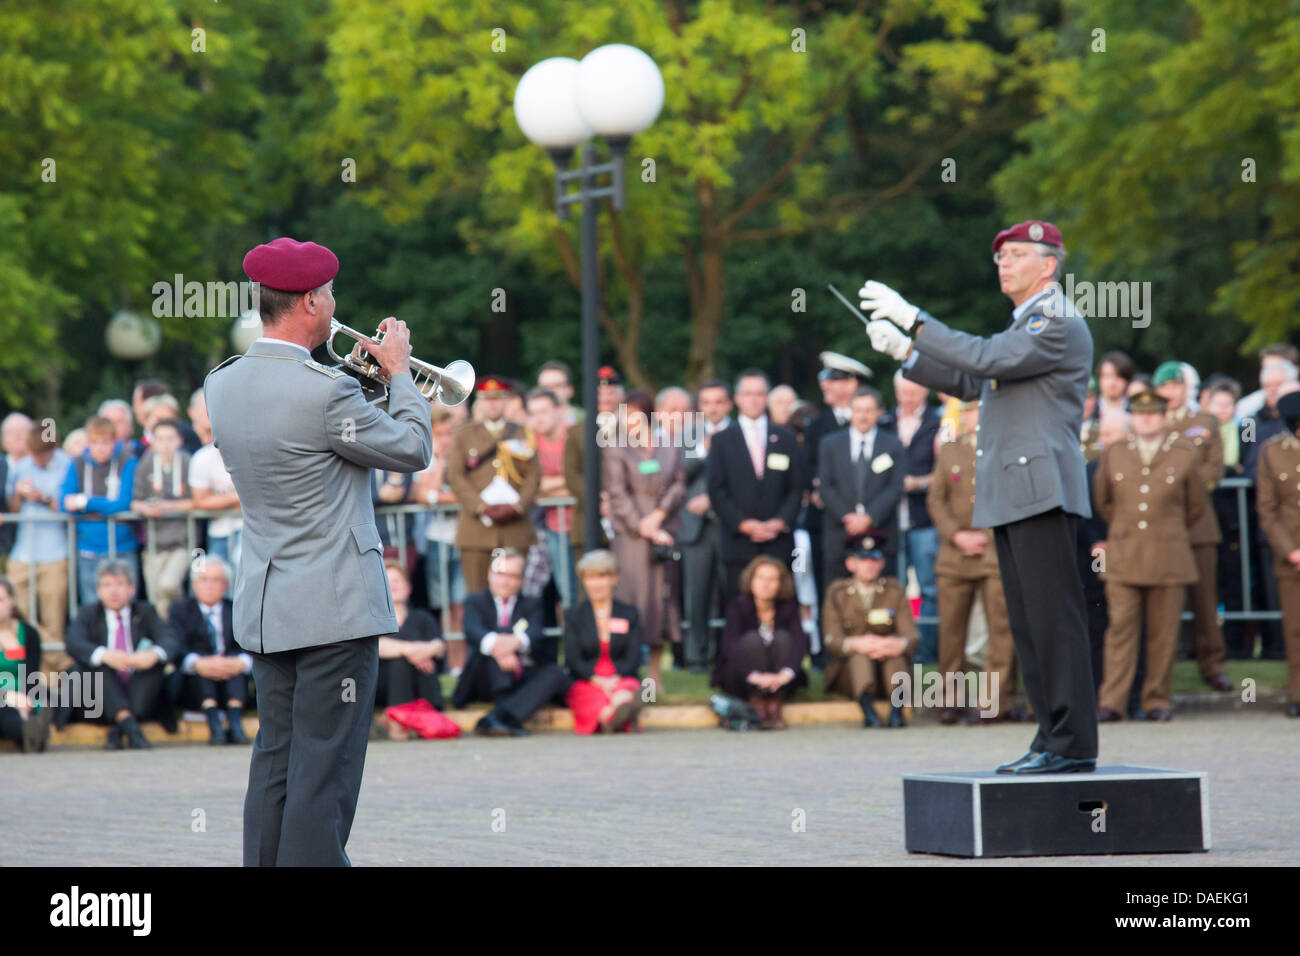 The German Army's Heeresmusikkorps 300 band from Koblenz performs in a Beating Retreat ceremony in front of The Big House, Rheindahlen Military Complex, Germany Stock Photo